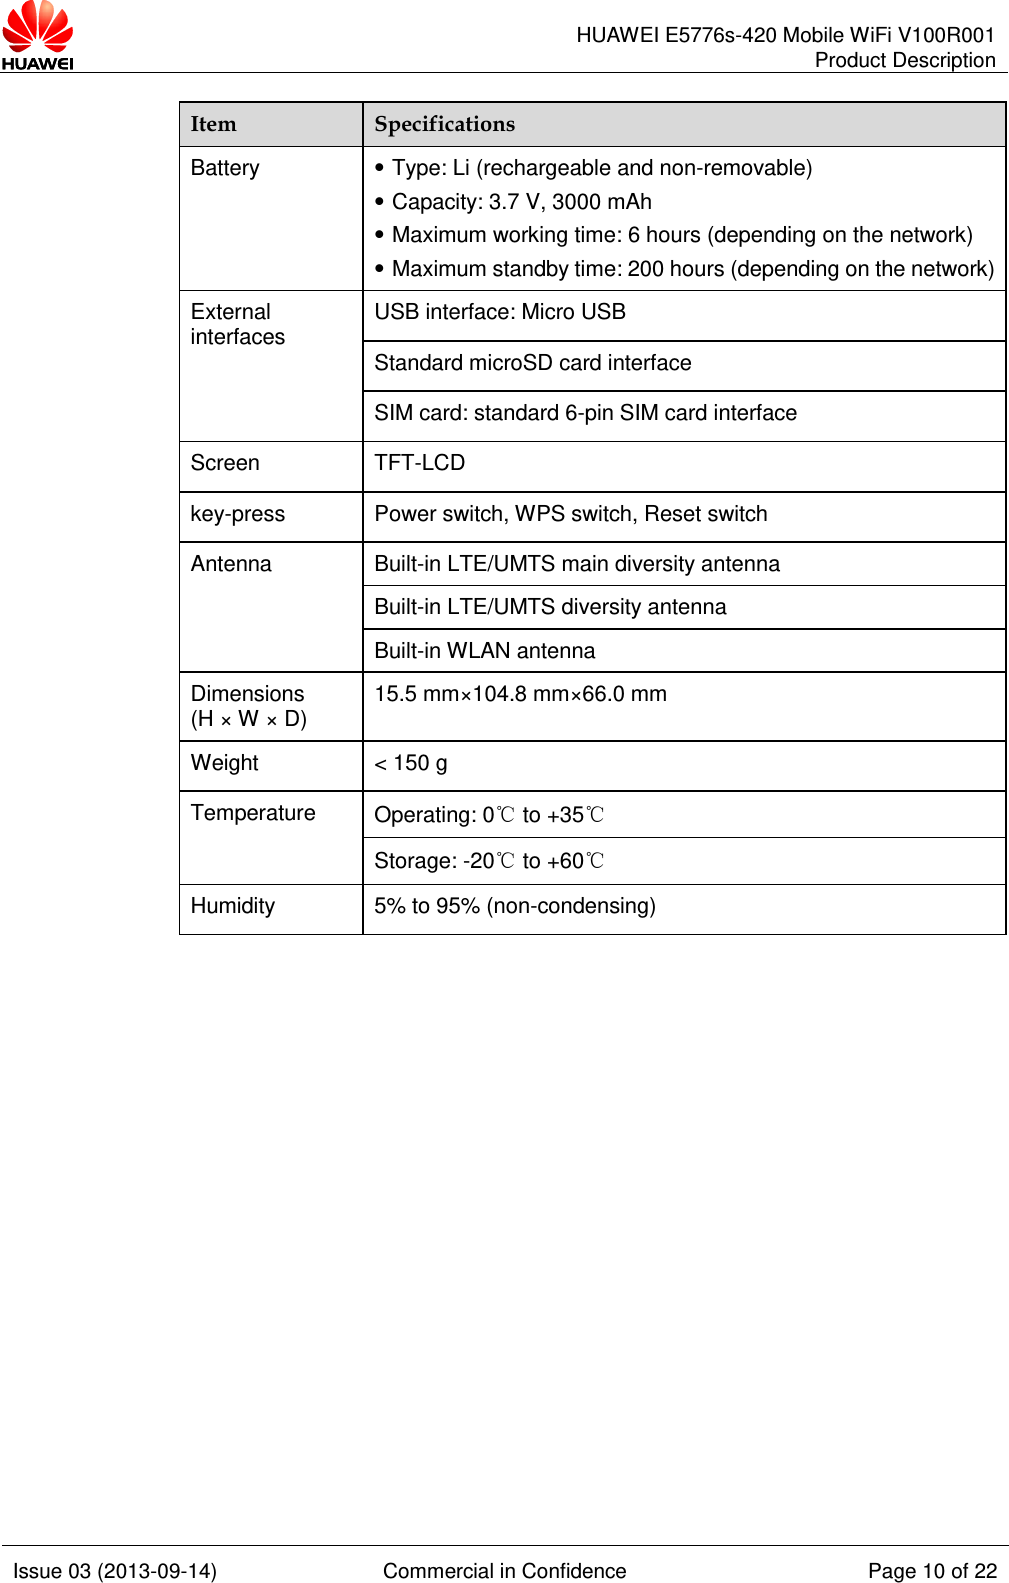      HUAWEI E5776s-420 Mobile WiFi V100R001 Product Description    Issue 03 (2013-09-14) Commercial in Confidence Page 10 of 22  Item Specifications Battery    Type: Li (rechargeable and non-removable)  Capacity: 3.7 V, 3000 mAh  Maximum working time: 6 hours (depending on the network)    Maximum standby time: 200 hours (depending on the network) External interfaces USB interface: Micro USB Standard microSD card interface SIM card: standard 6-pin SIM card interface Screen TFT-LCD key-press Power switch, WPS switch, Reset switch Antenna Built-in LTE/UMTS main diversity antenna Built-in LTE/UMTS diversity antenna Built-in WLAN antenna Dimensions (H × W × D) 15.5 mm×104.8 mm×66.0 mm Weight &lt; 150 g Temperature Operating: 0℃ to +35℃ Storage: -20℃ to +60℃ Humidity 5% to 95% (non-condensing)              